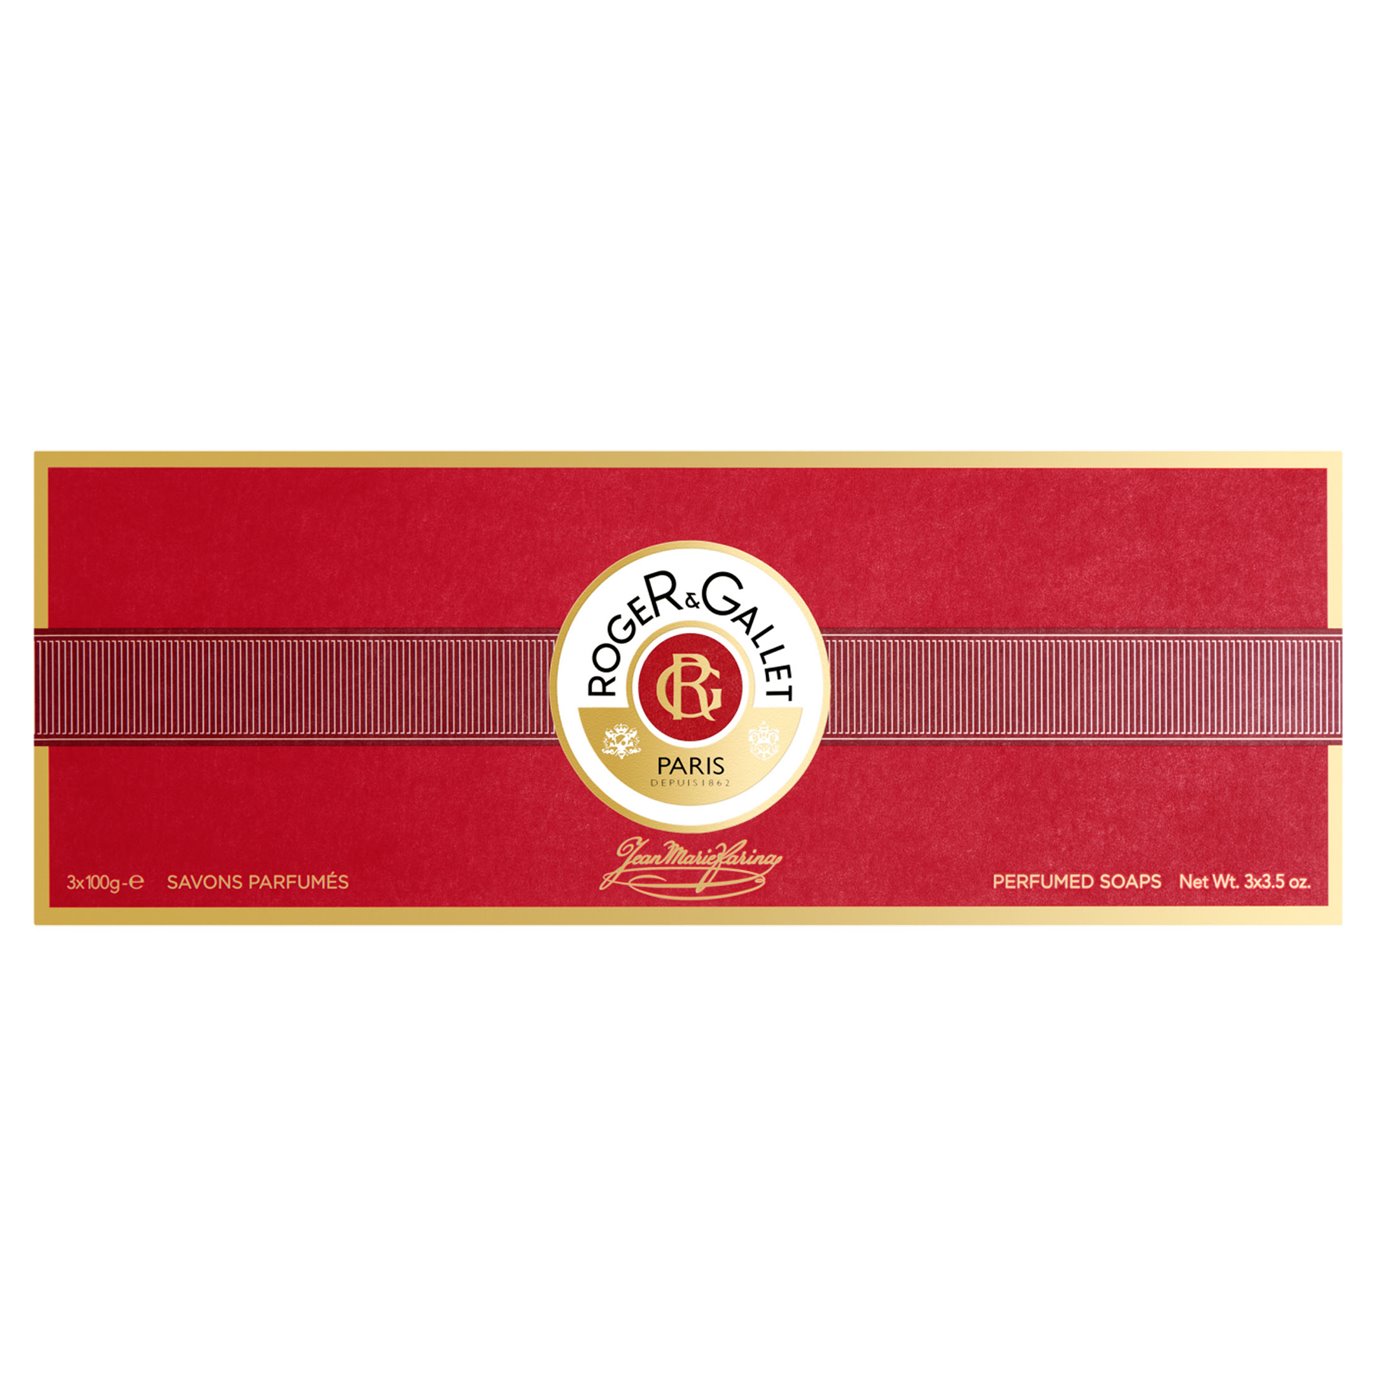 Jean Marie Farina Extra Vieille Perfumed Soaps Box of 3 by Roger & Gallet (3 x 3.5 oz)